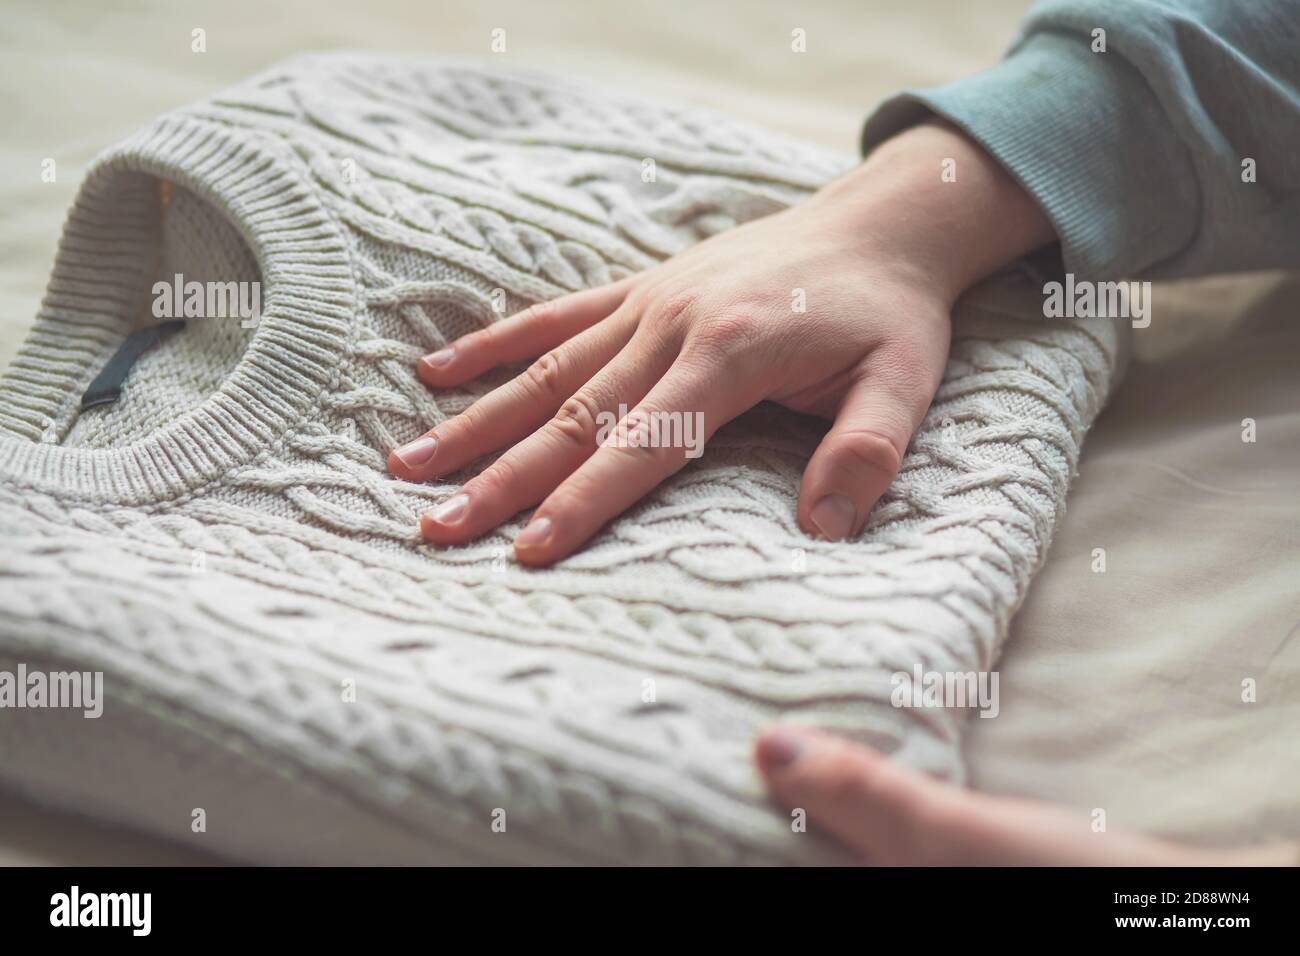 A man in gray clothes puts a soft white warm sweater in a neat pile, and gently strokes his hand over the pleasant fabric. Clothing for cold days. Stock Photo